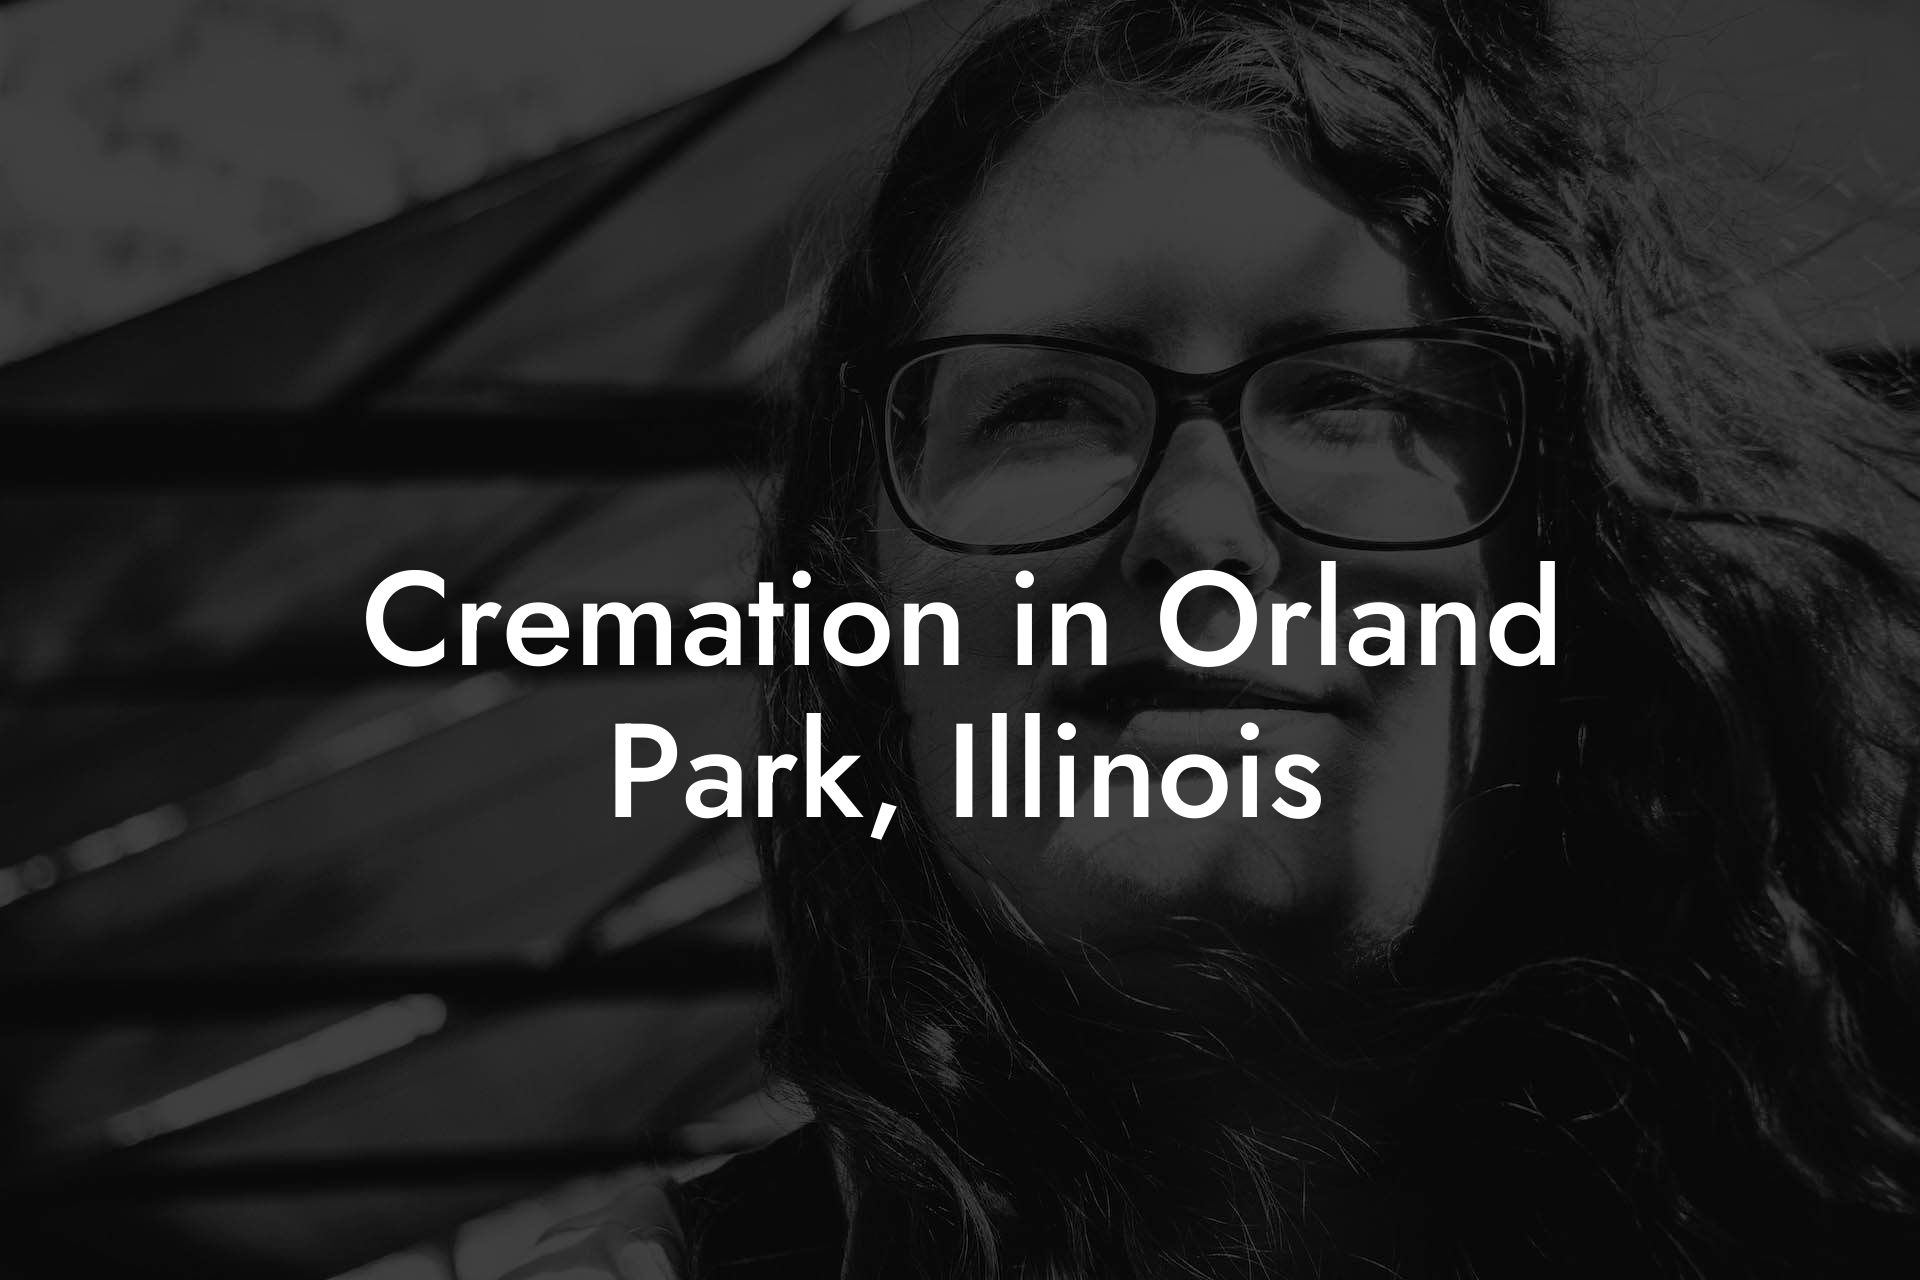 Cremation in Orland Park, Illinois